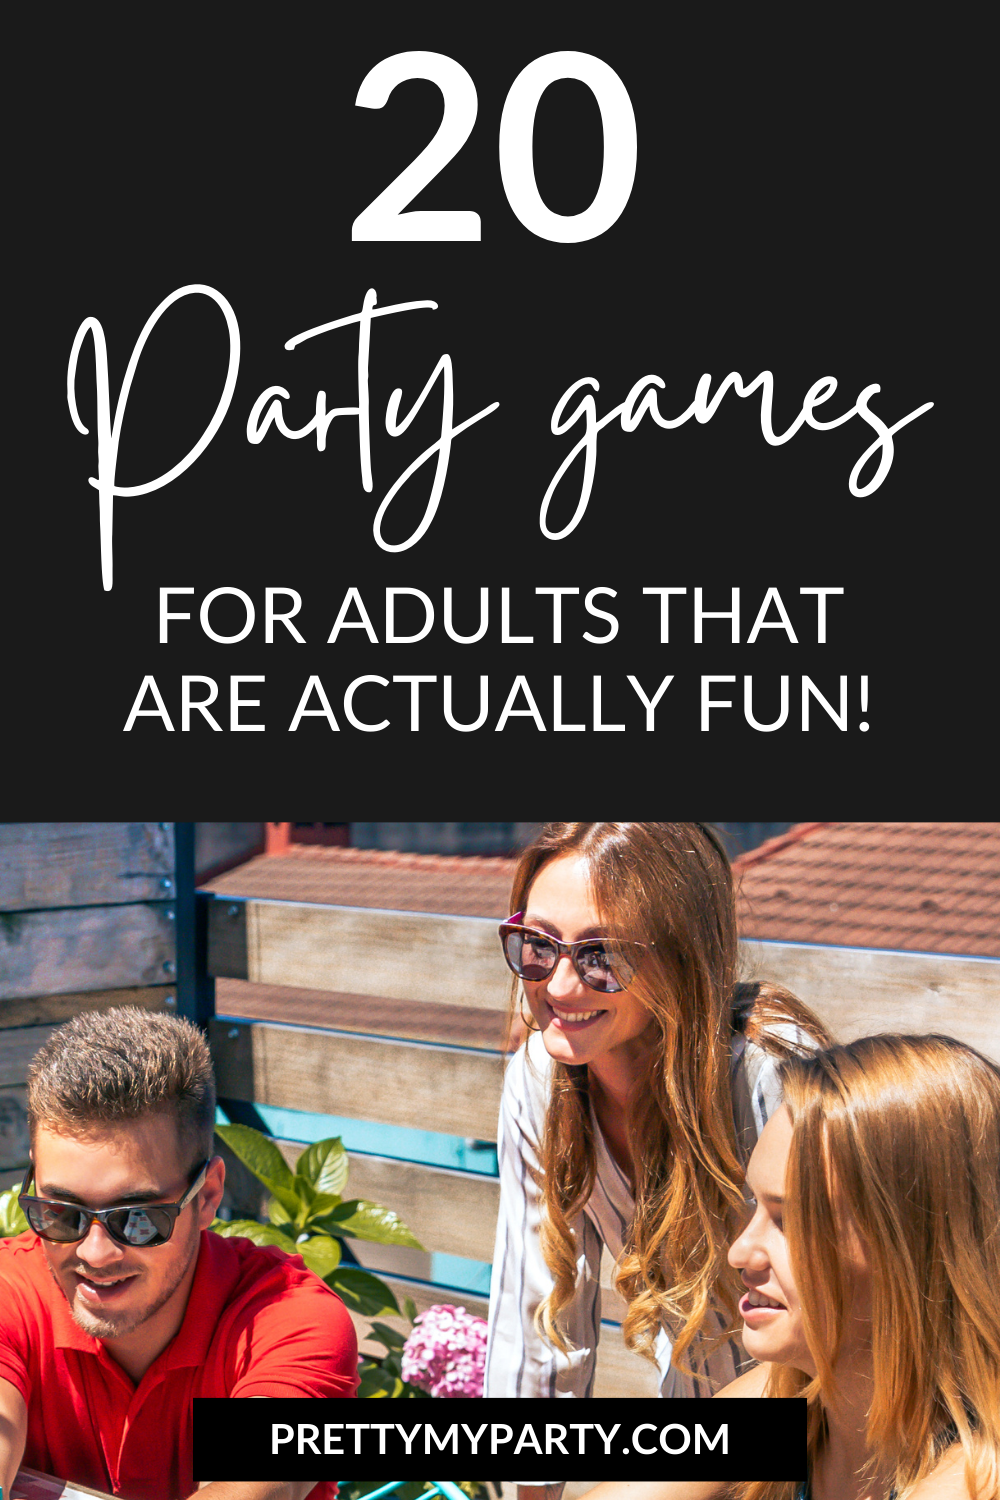 20 party games for adults that are actually fun on www.prettymyparty.com